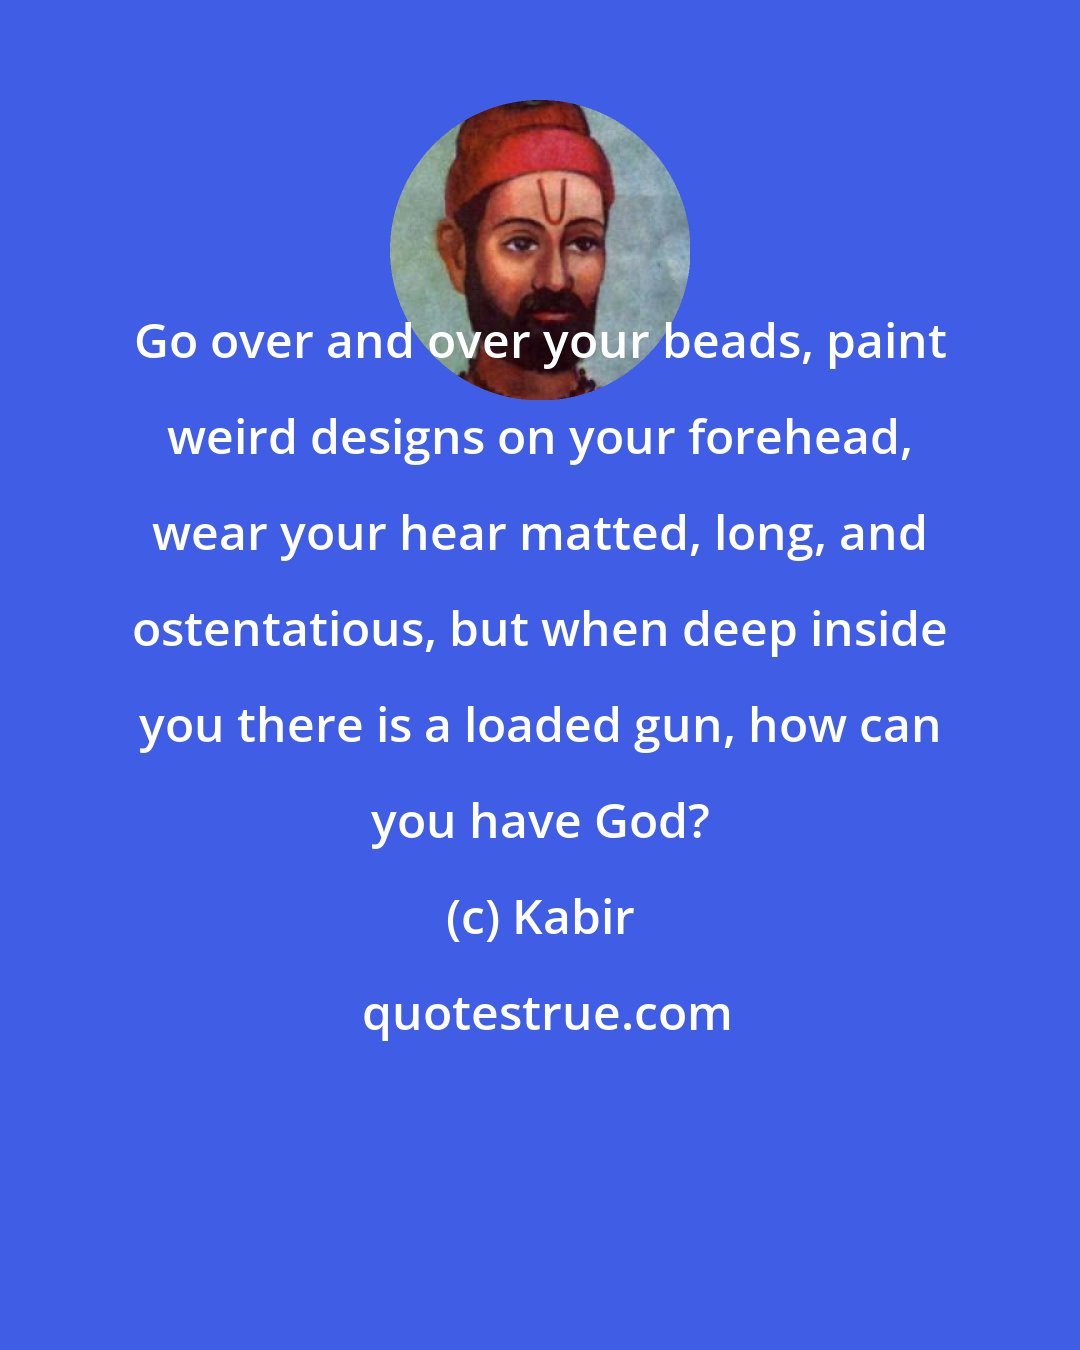 Kabir: Go over and over your beads, paint weird designs on your forehead, wear your hear matted, long, and ostentatious, but when deep inside you there is a loaded gun, how can you have God?